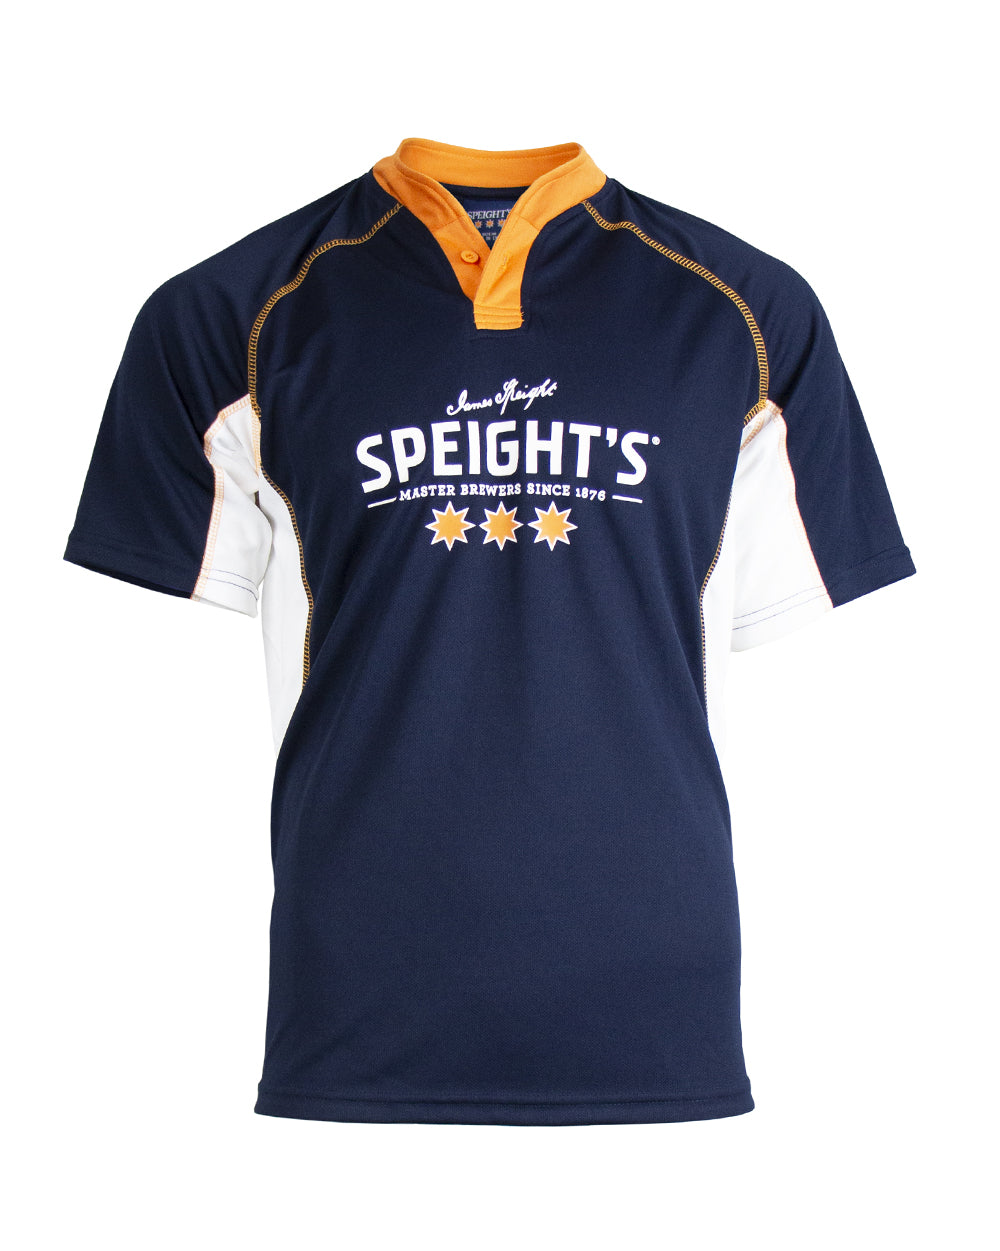 Speight's Rugby Jersey -  Beer Gear Apparel & Merchandise - Speights - Lion Red - VB - Tokyo Dy merch